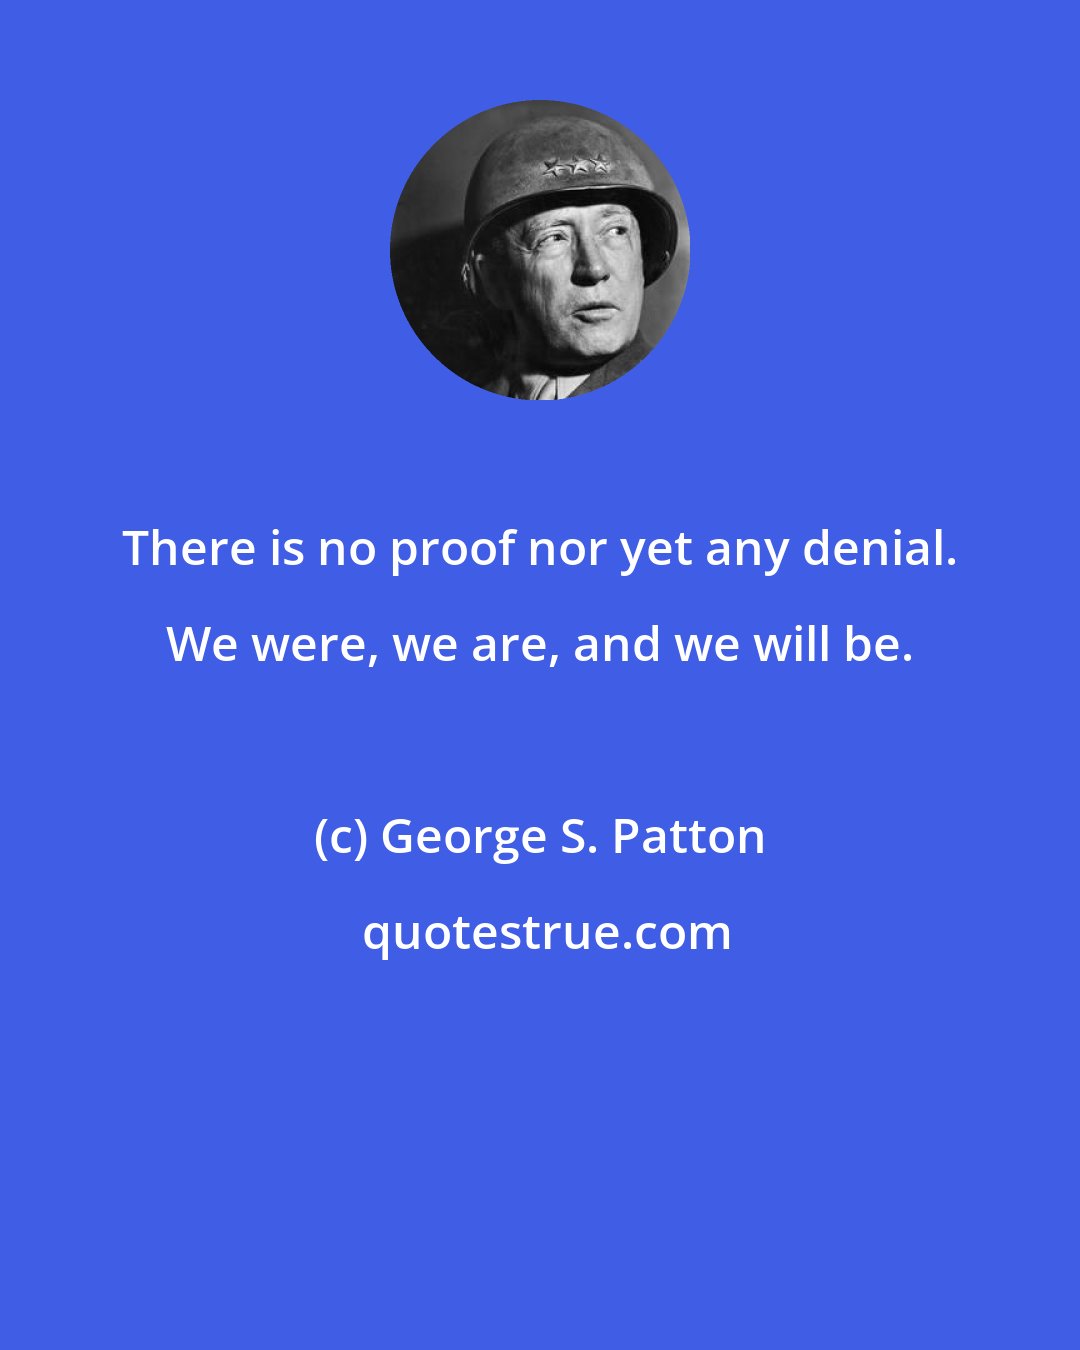 George S. Patton: There is no proof nor yet any denial. We were, we are, and we will be.